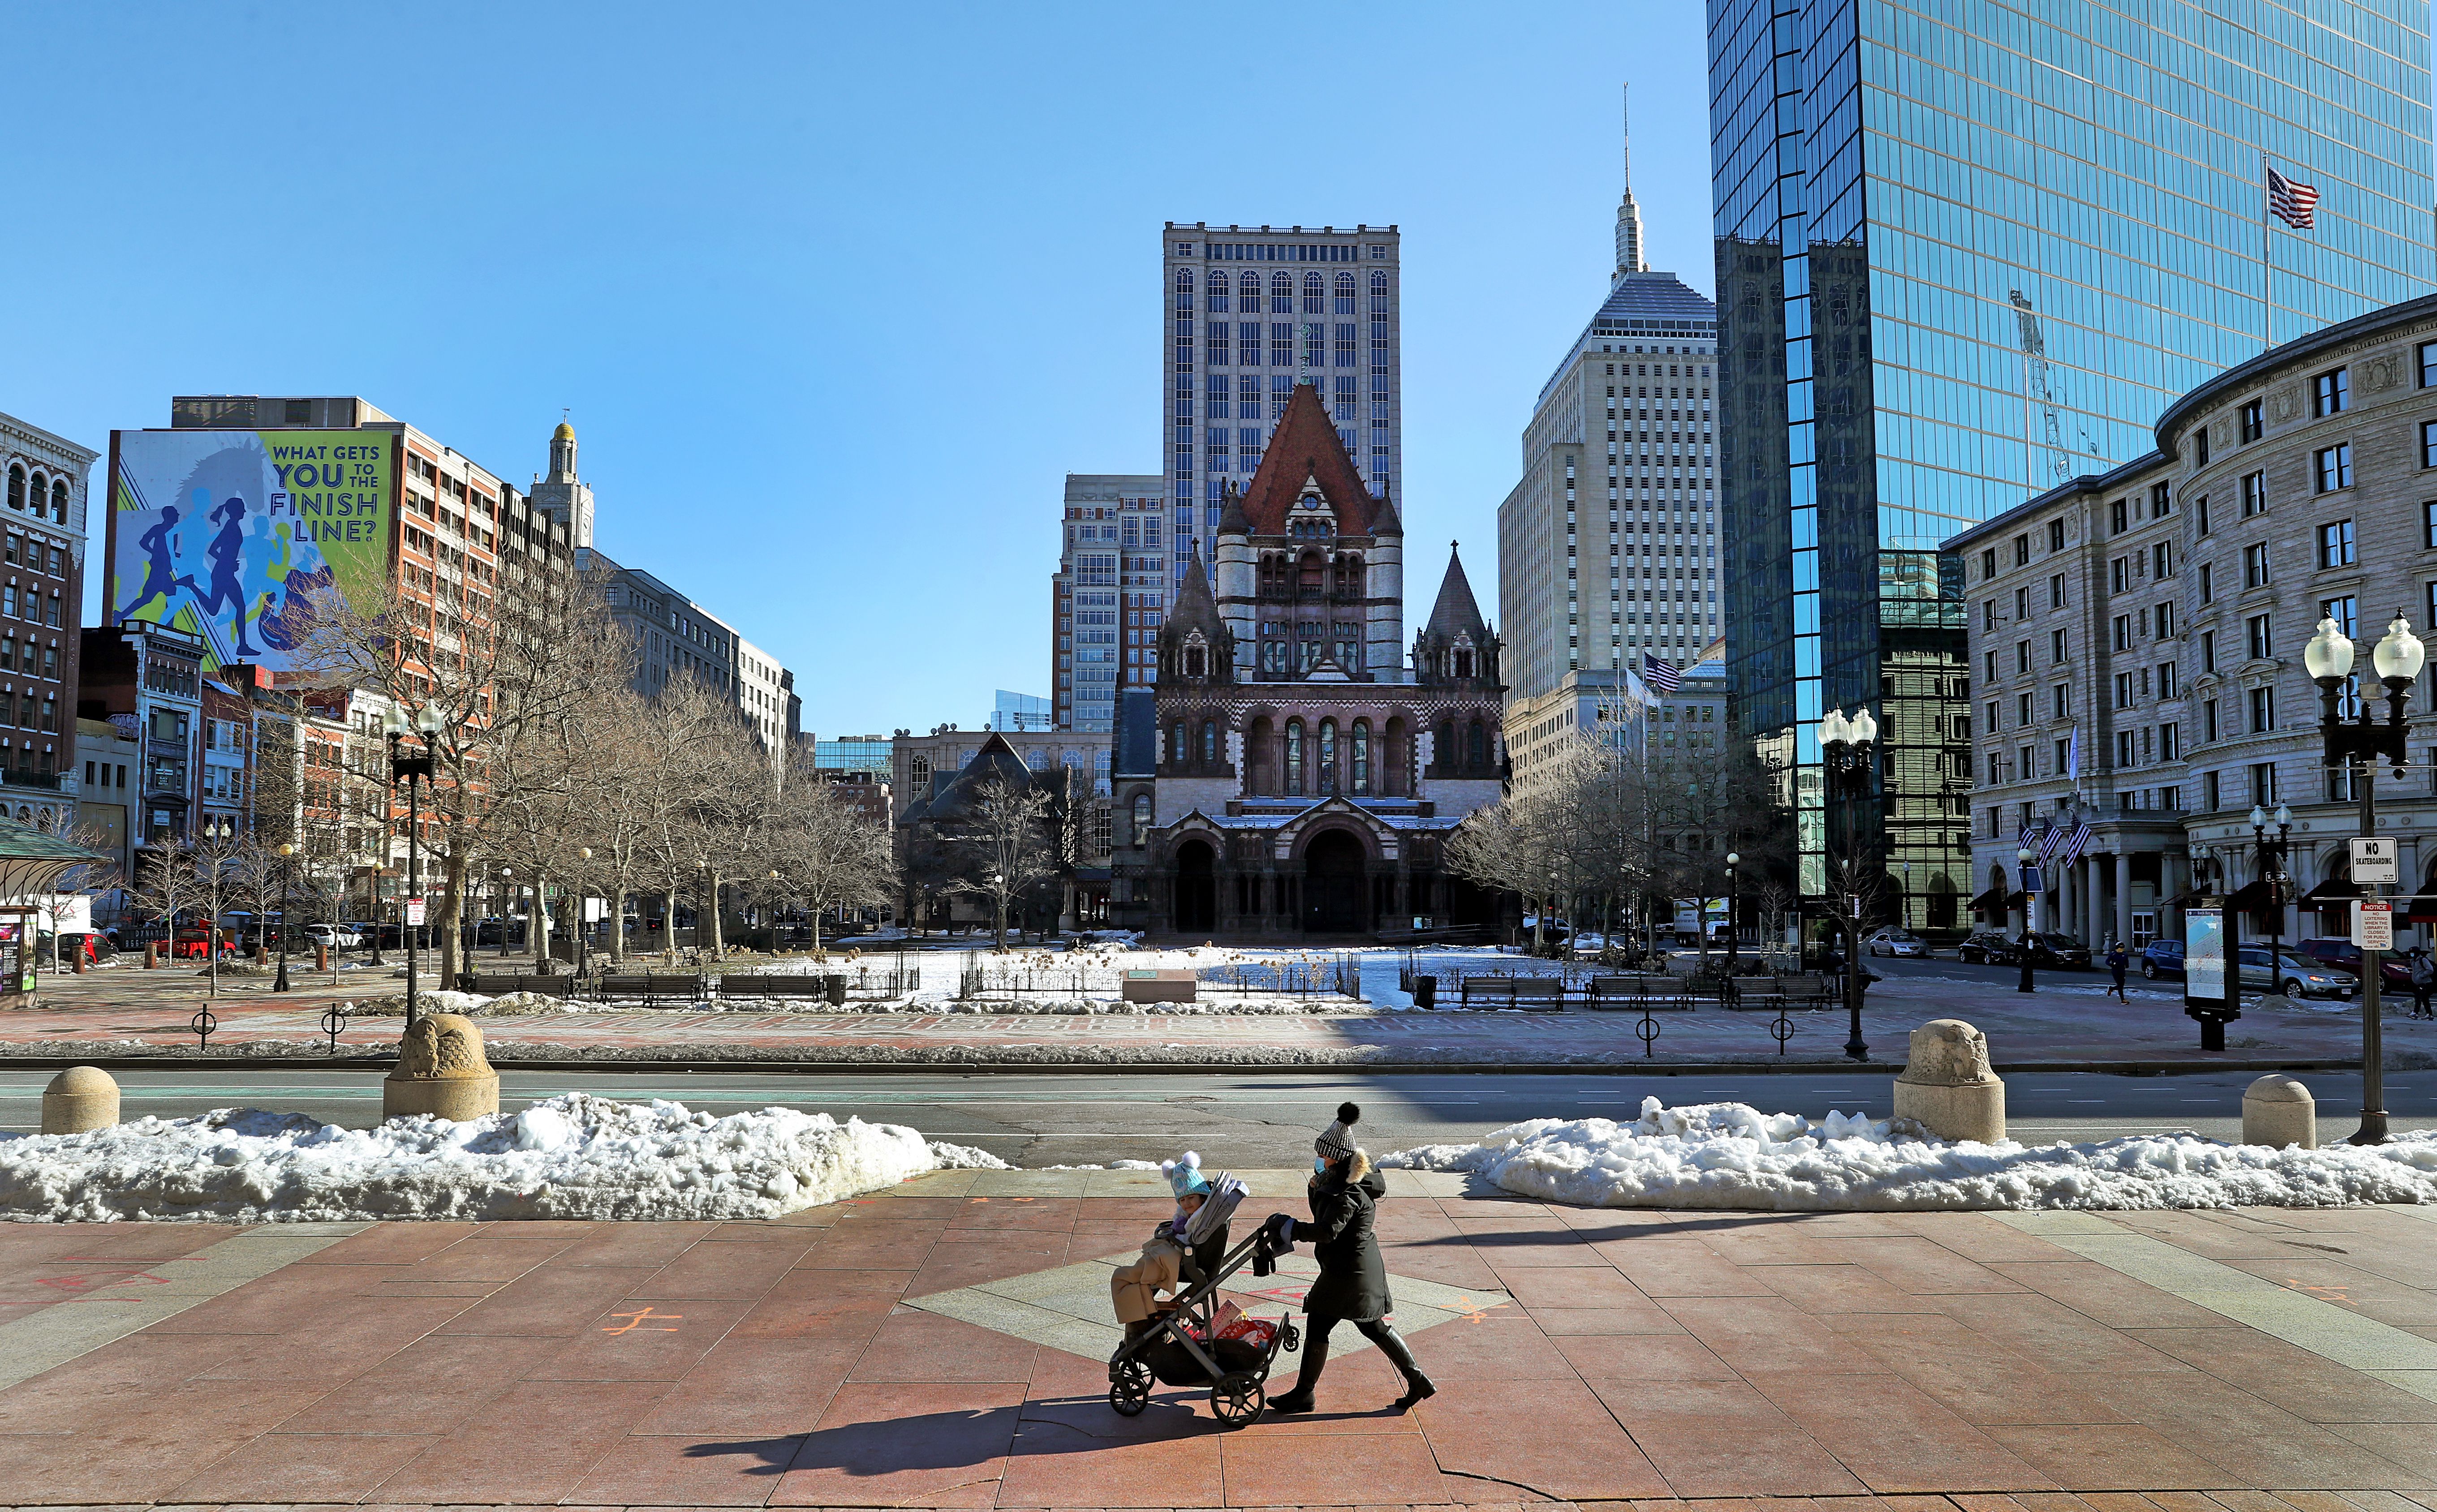 City of Boston is working with architectural firm to rethink Copley Square  - The Boston Globe